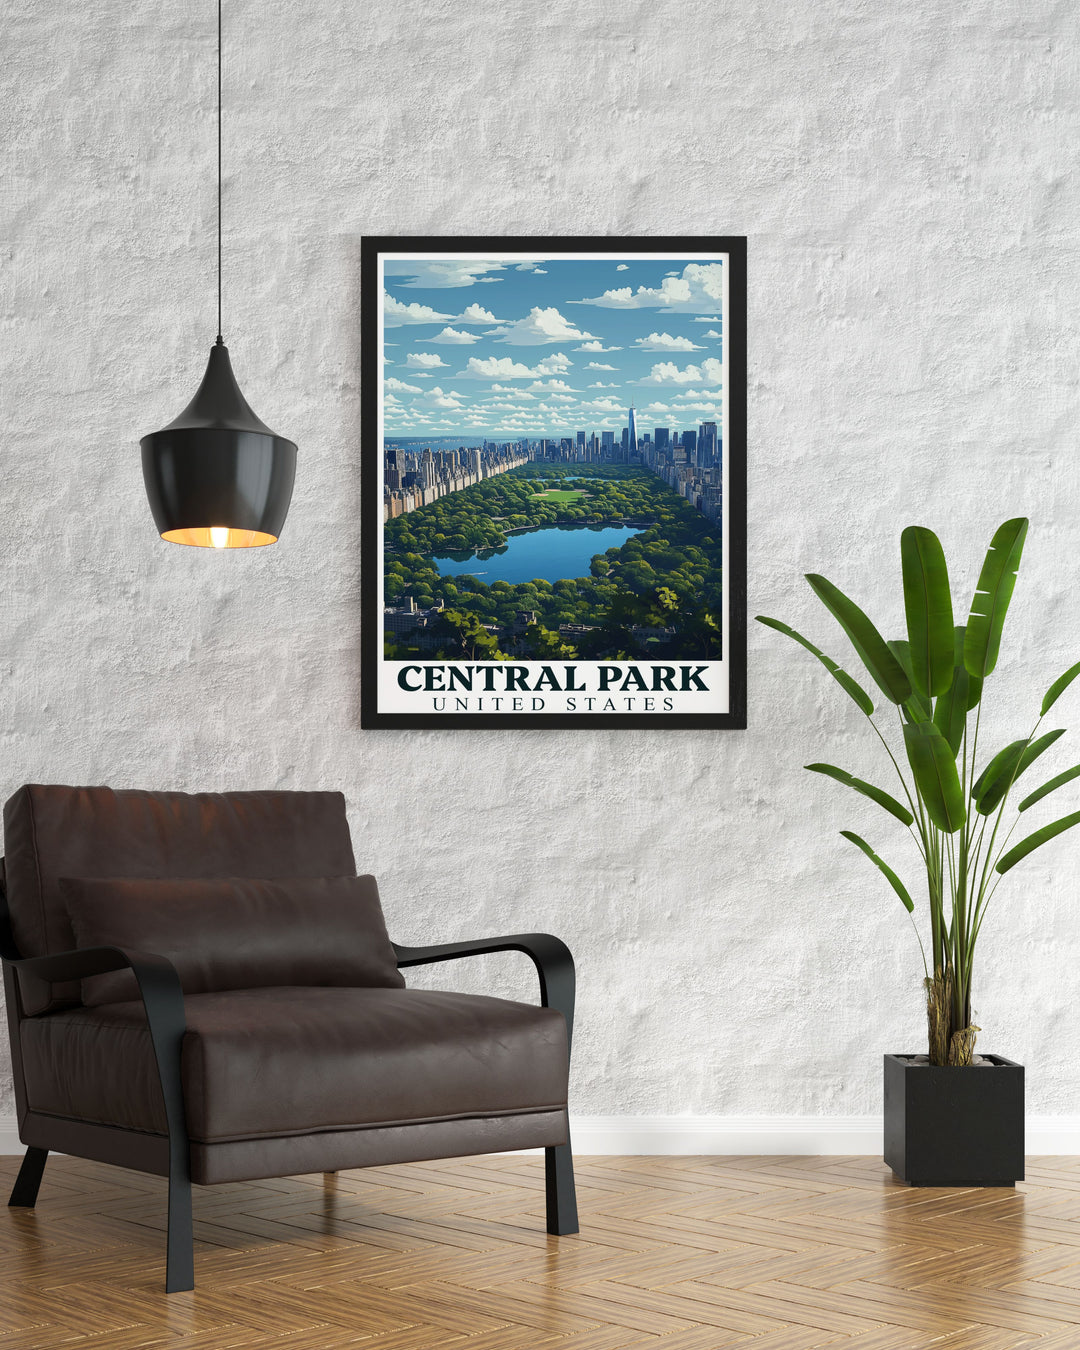 Highlighting the serene presence of Central Parks Lake and the surrounding greenery, this travel poster is perfect for those who appreciate the natural and cultural richness of New York City.